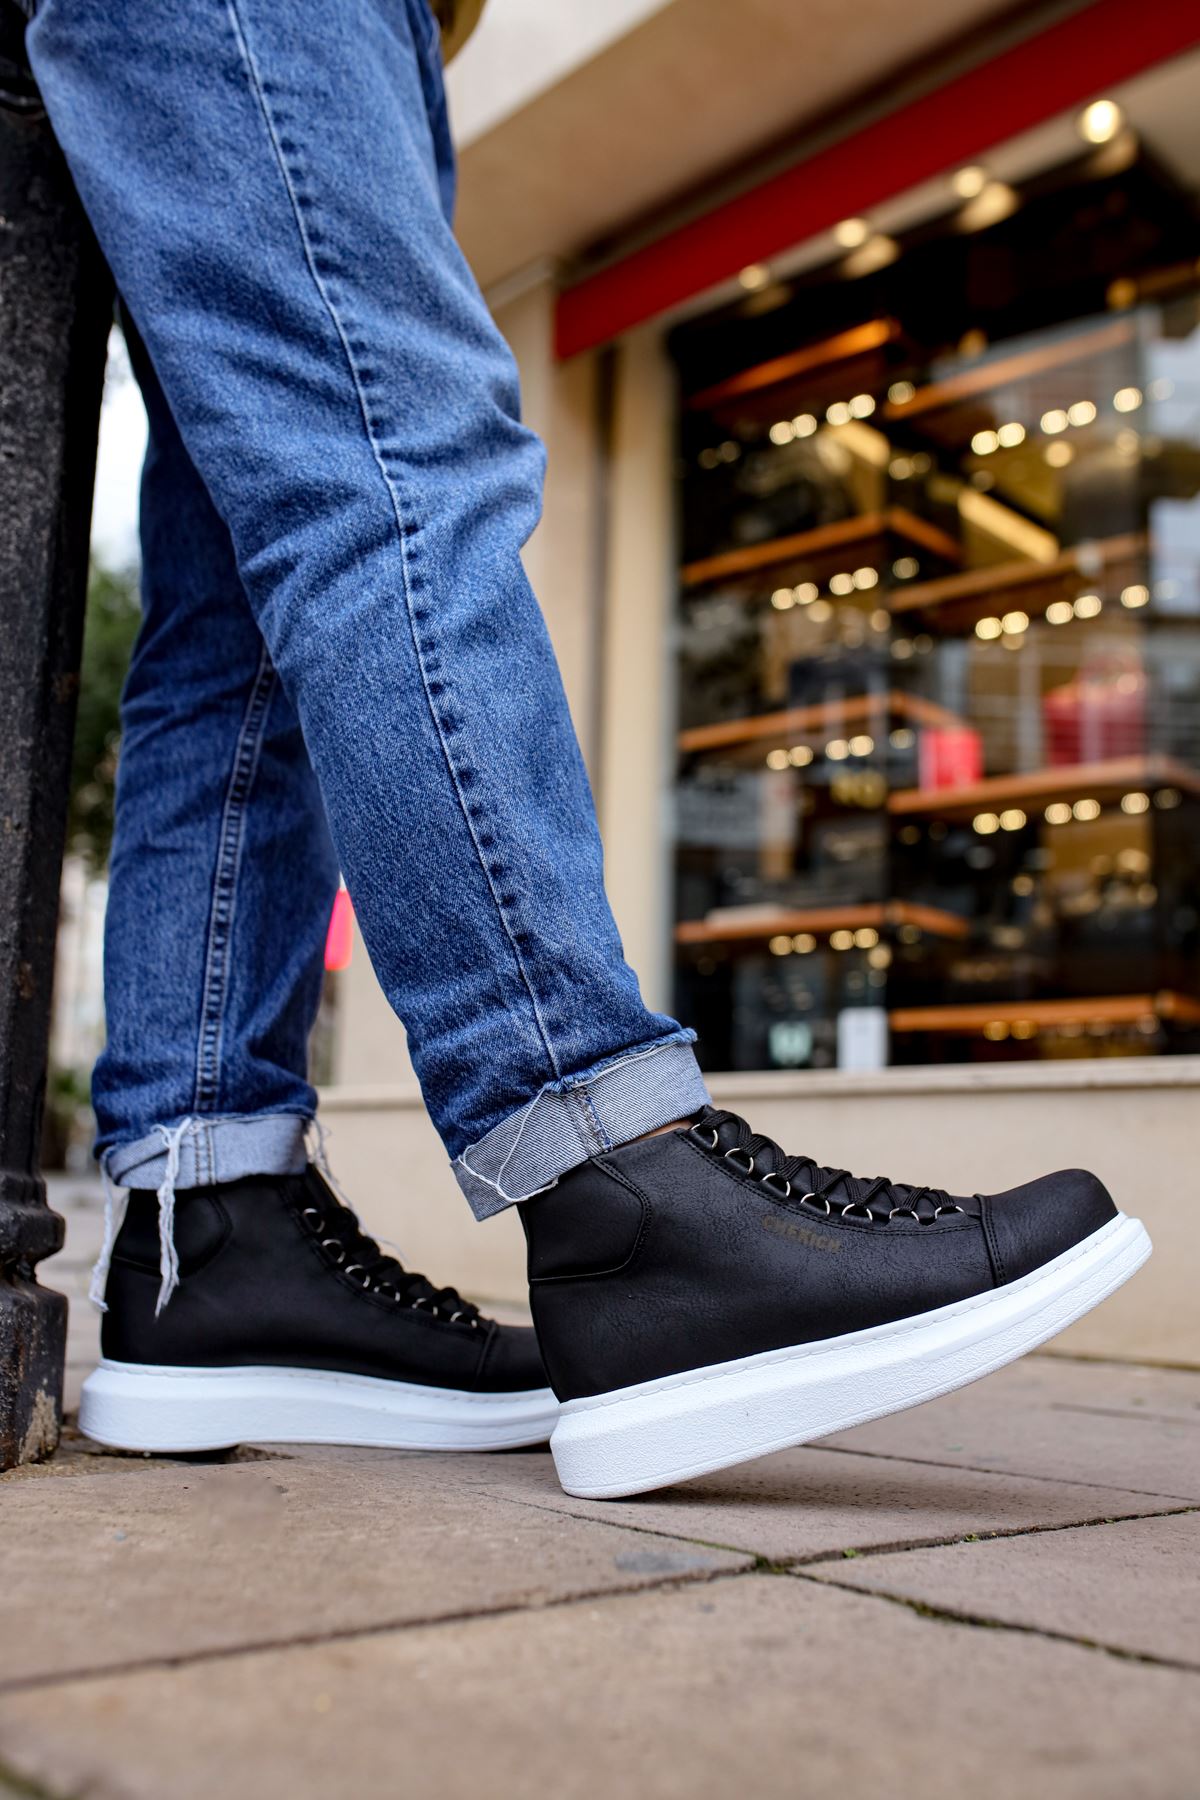 CH258 Men's Black-White Sole Metal Slug Lace-up High Sole Casual Sneaker Sports Boots - STREETMODE ™